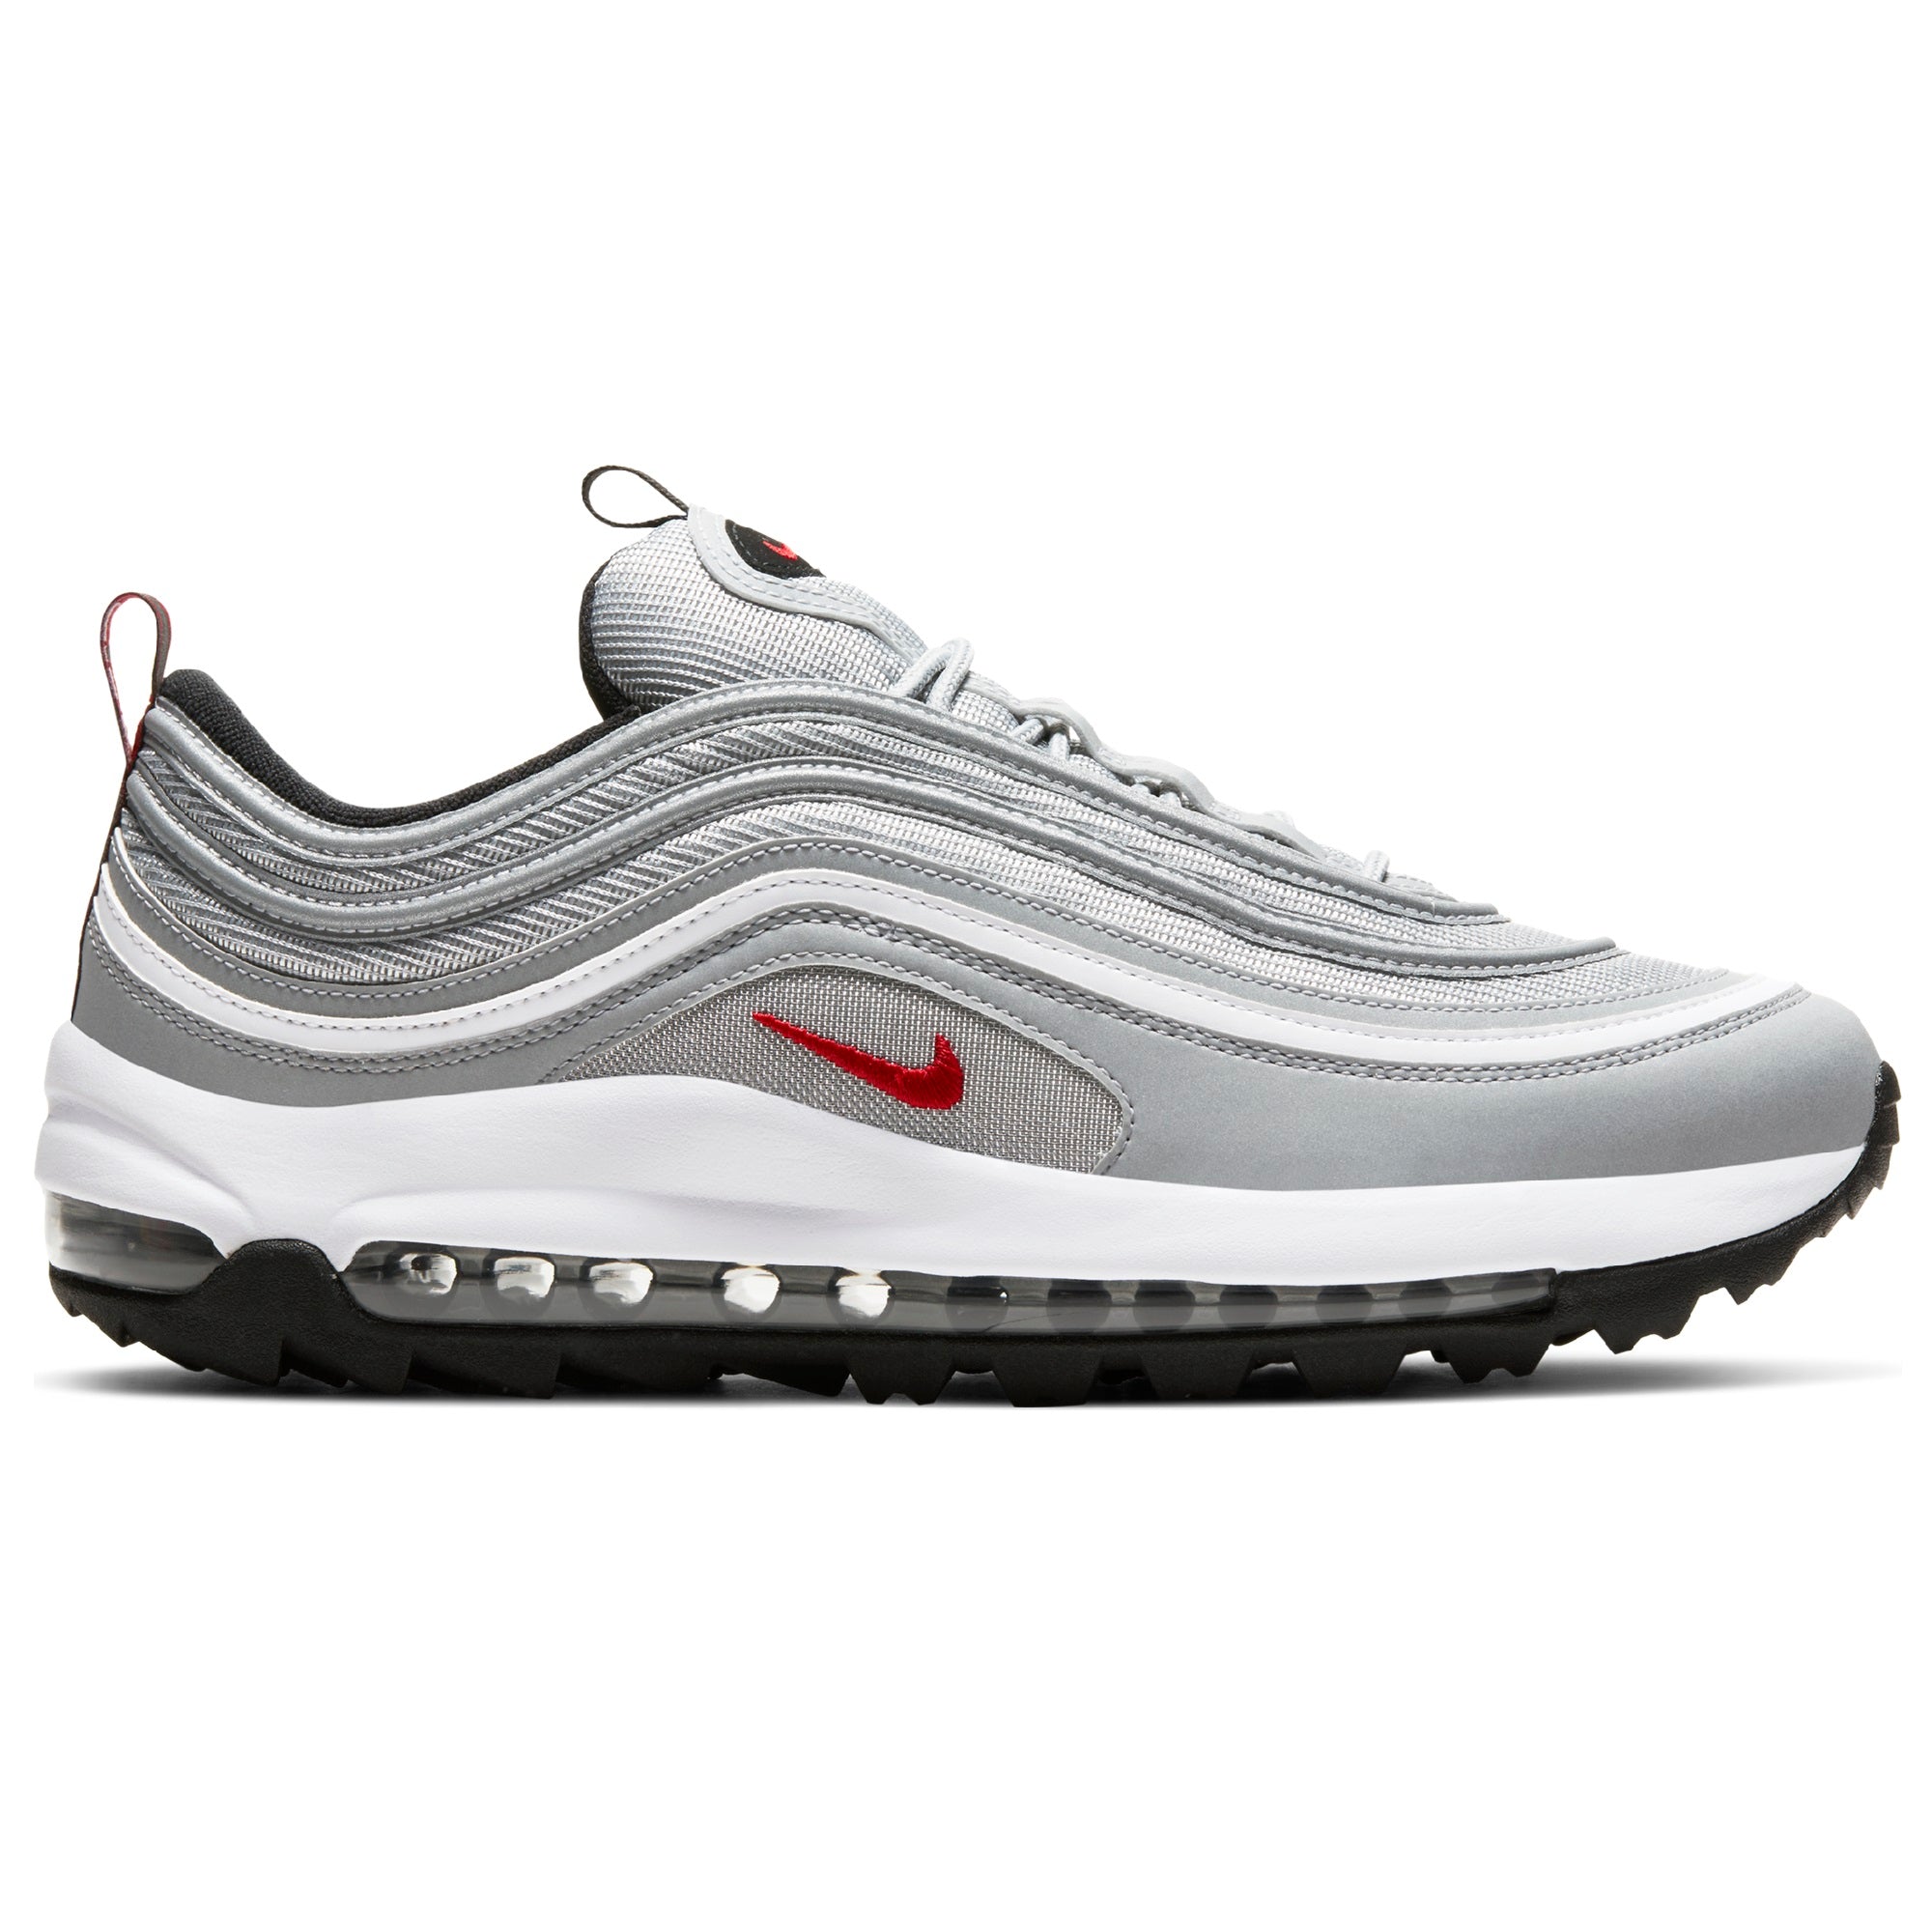 Nike Golf Air Max 97 G Silver Bullet Shoes CI7538 Silver & Function18